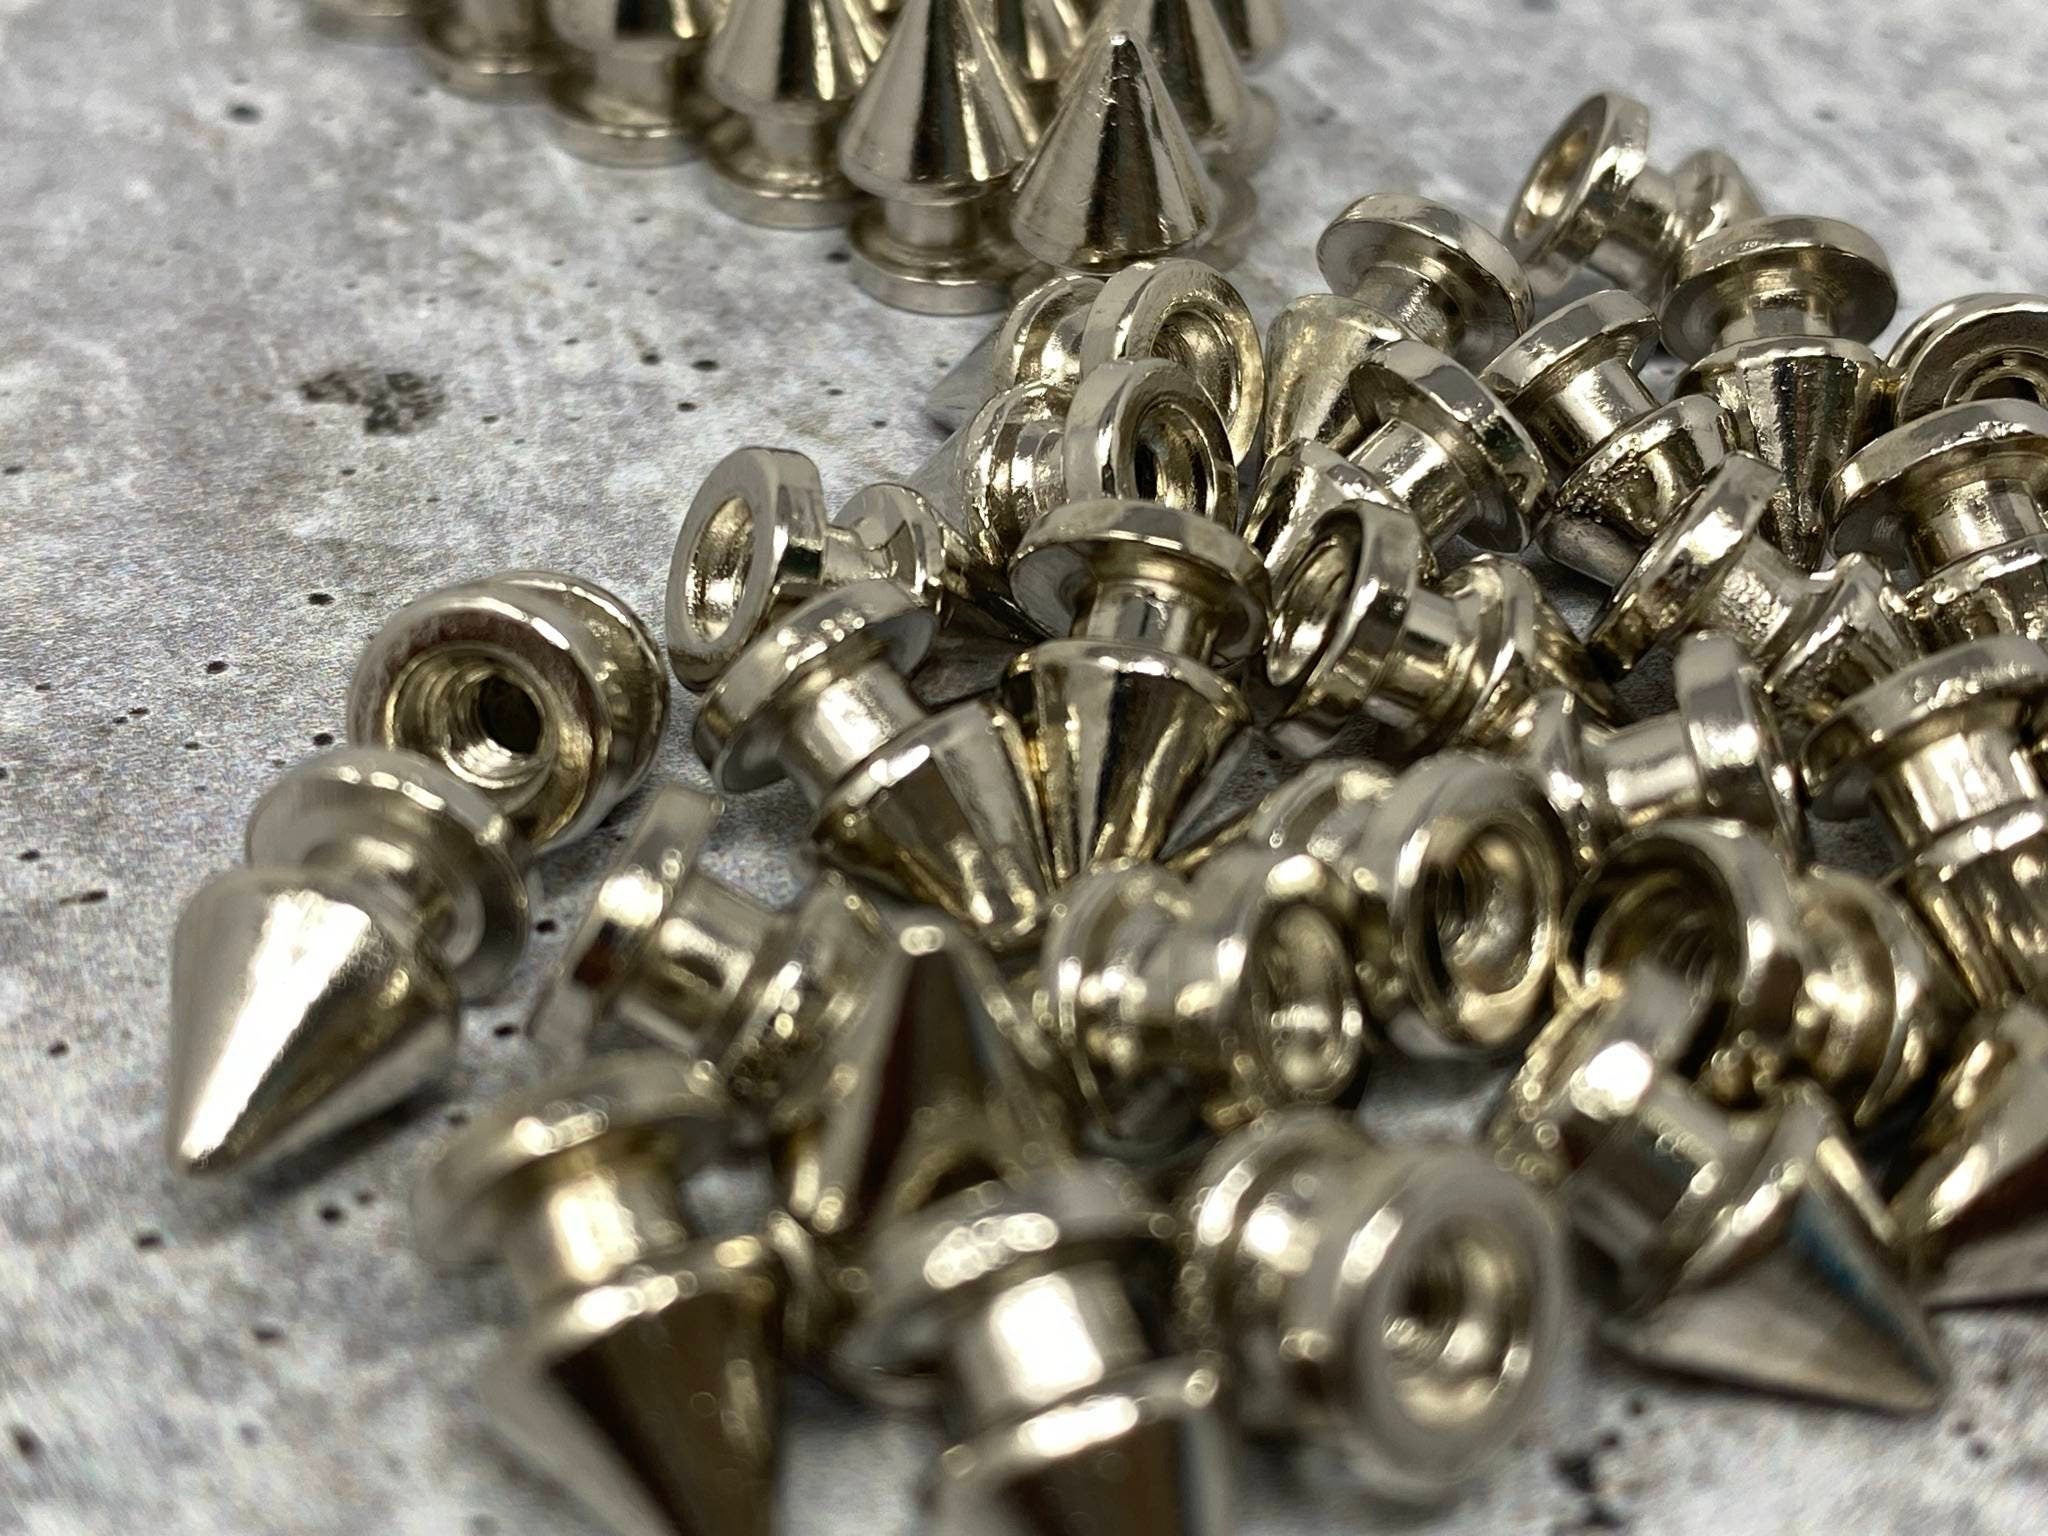 NEW, Screw on Spikes, 10mm SILVER Spiked Studs, Cone Spikes